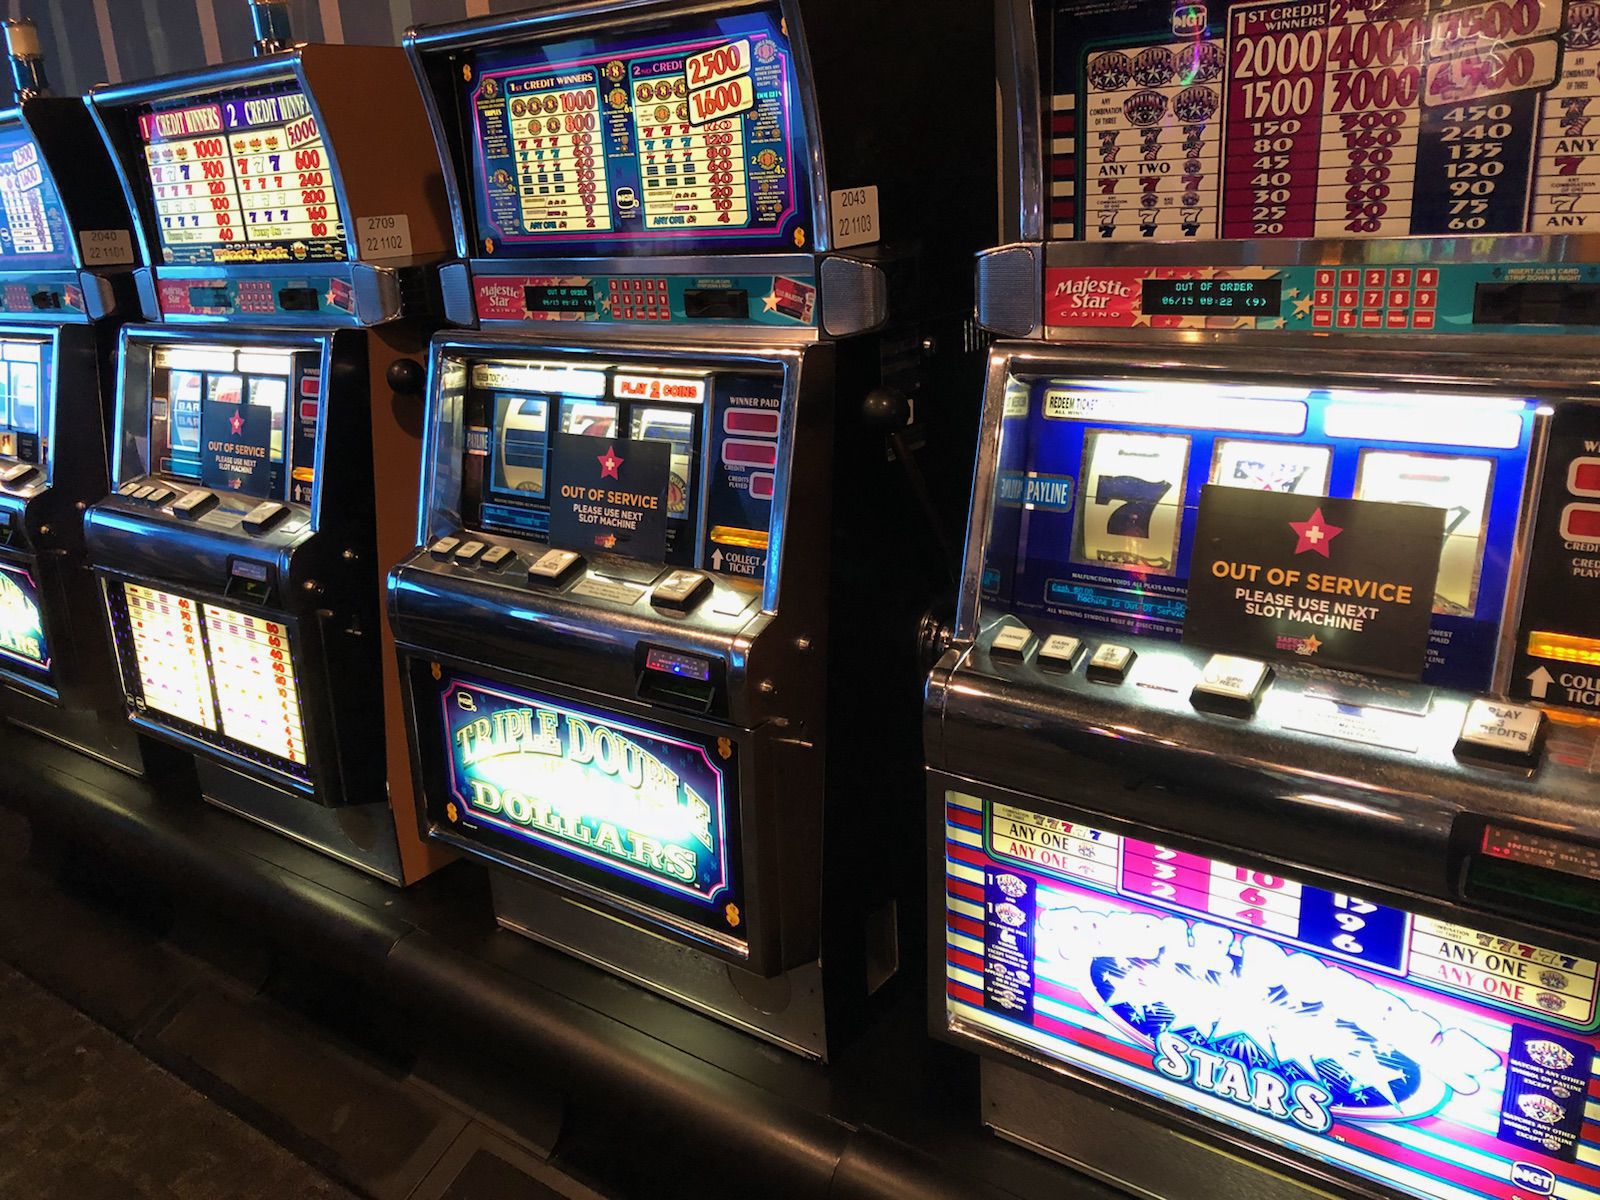 latest news on majestic casino in indiana